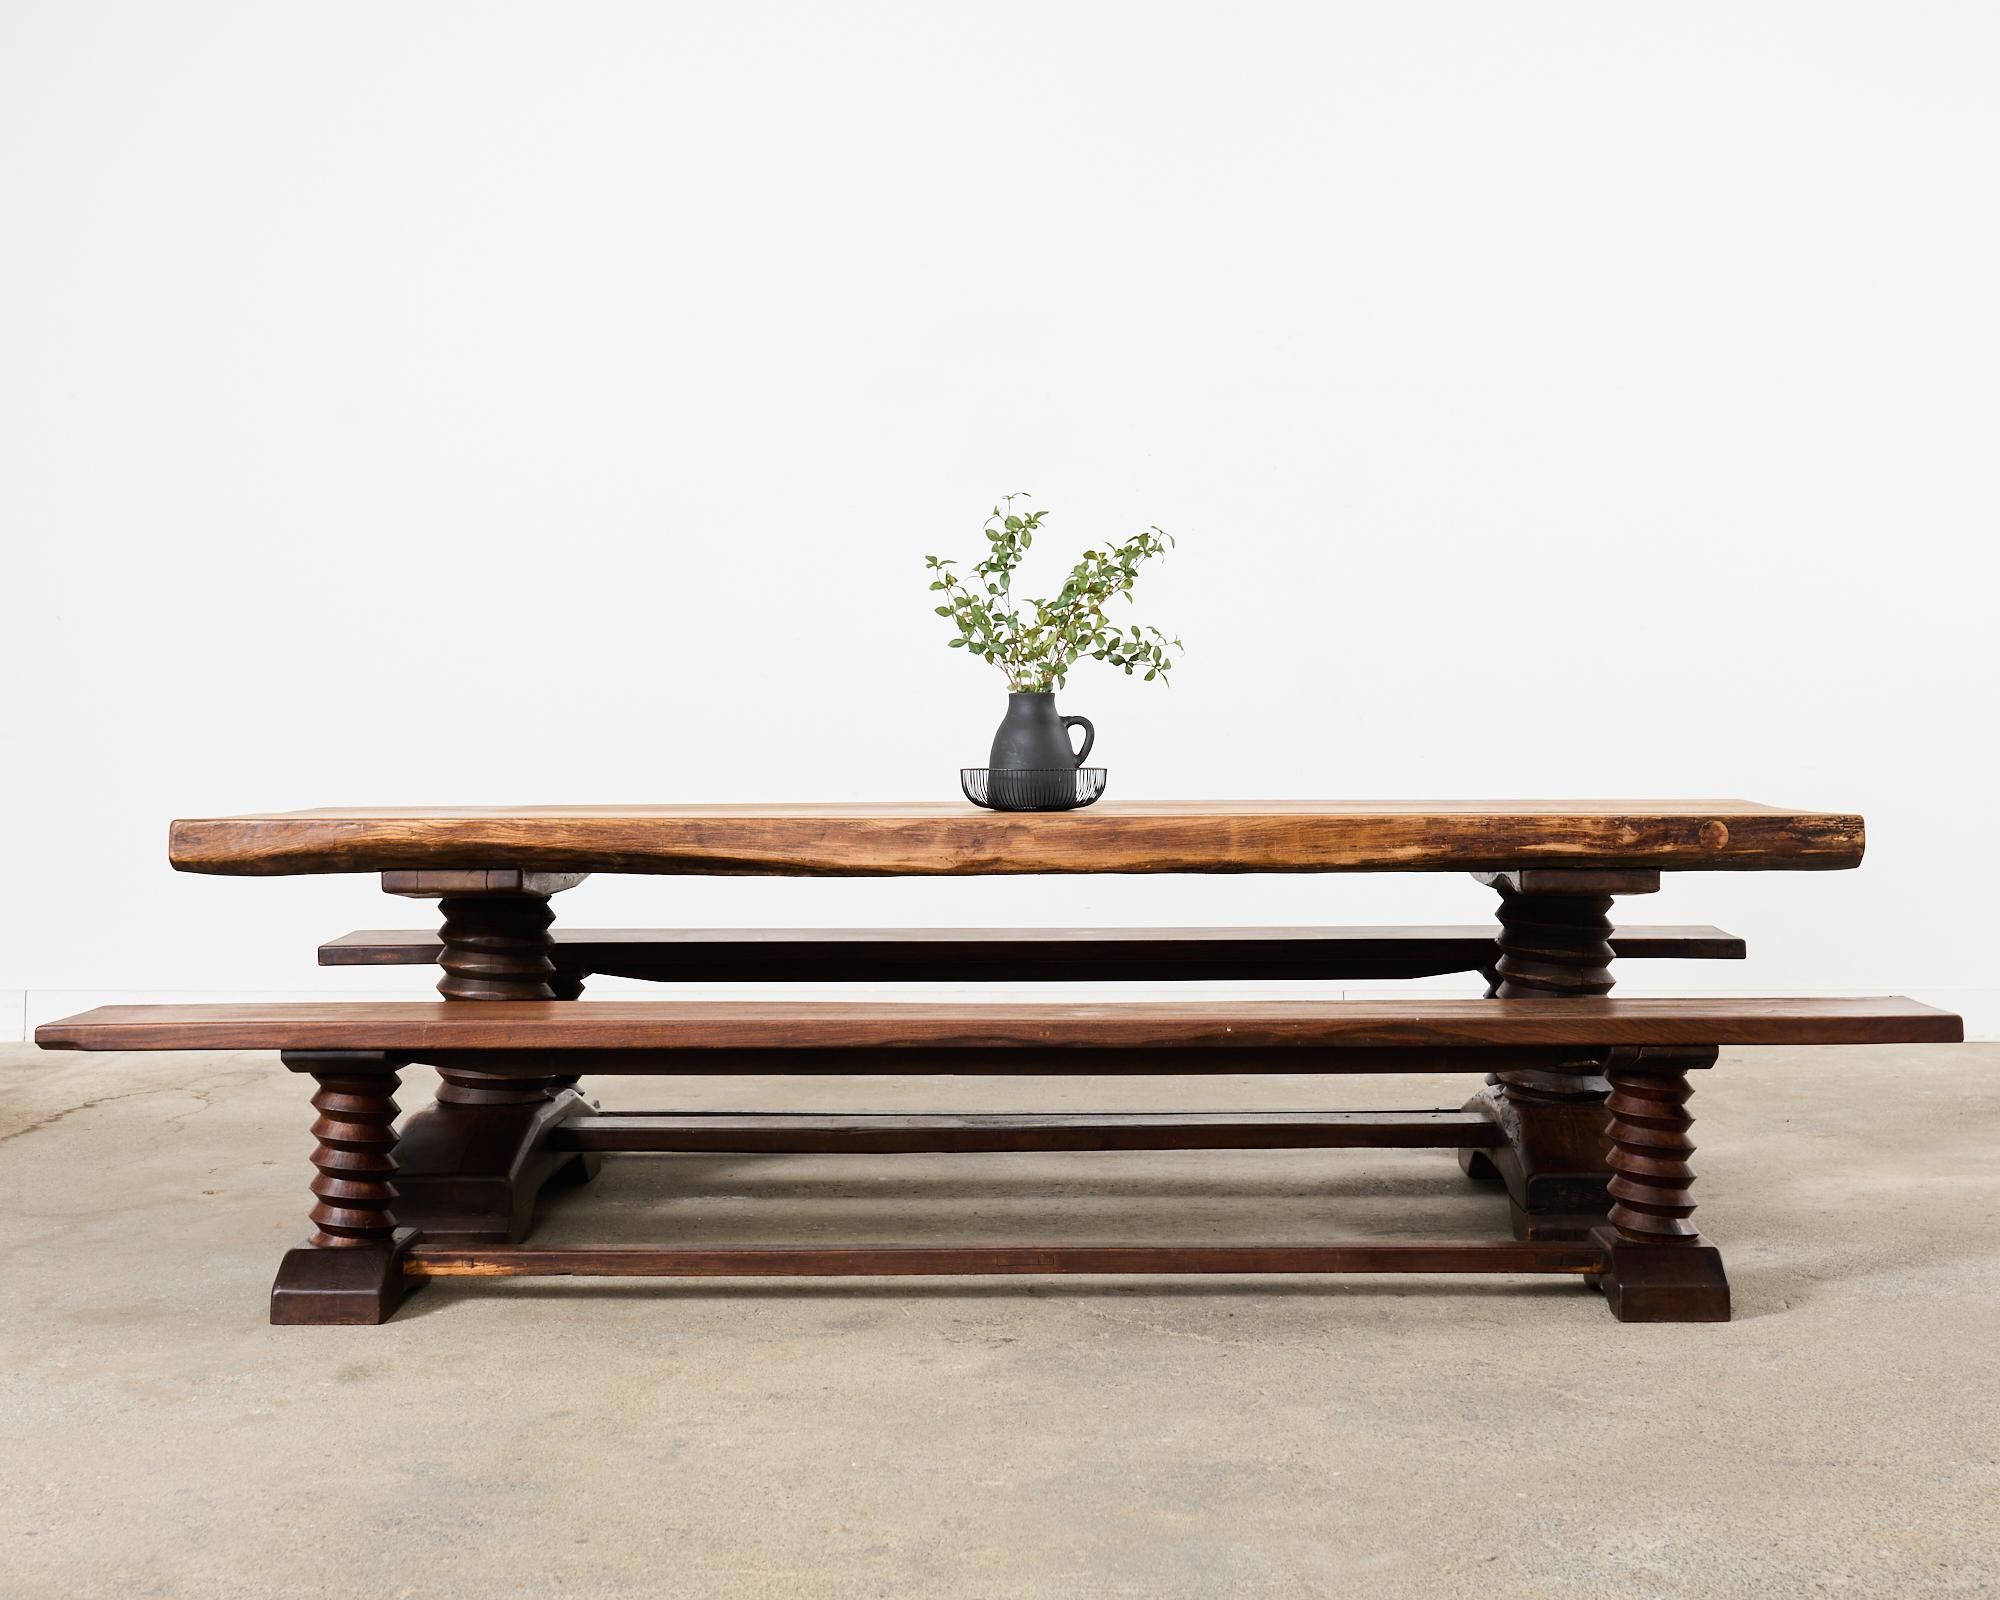 Rare mid-century modern oak trestle corkscrew dining benches attributed to French designer Charles Dudouyt (French 1885-1946). The massive benches are nearly 10 feet long and feature a trestle style with iconic corkscrew or twist legs ending with